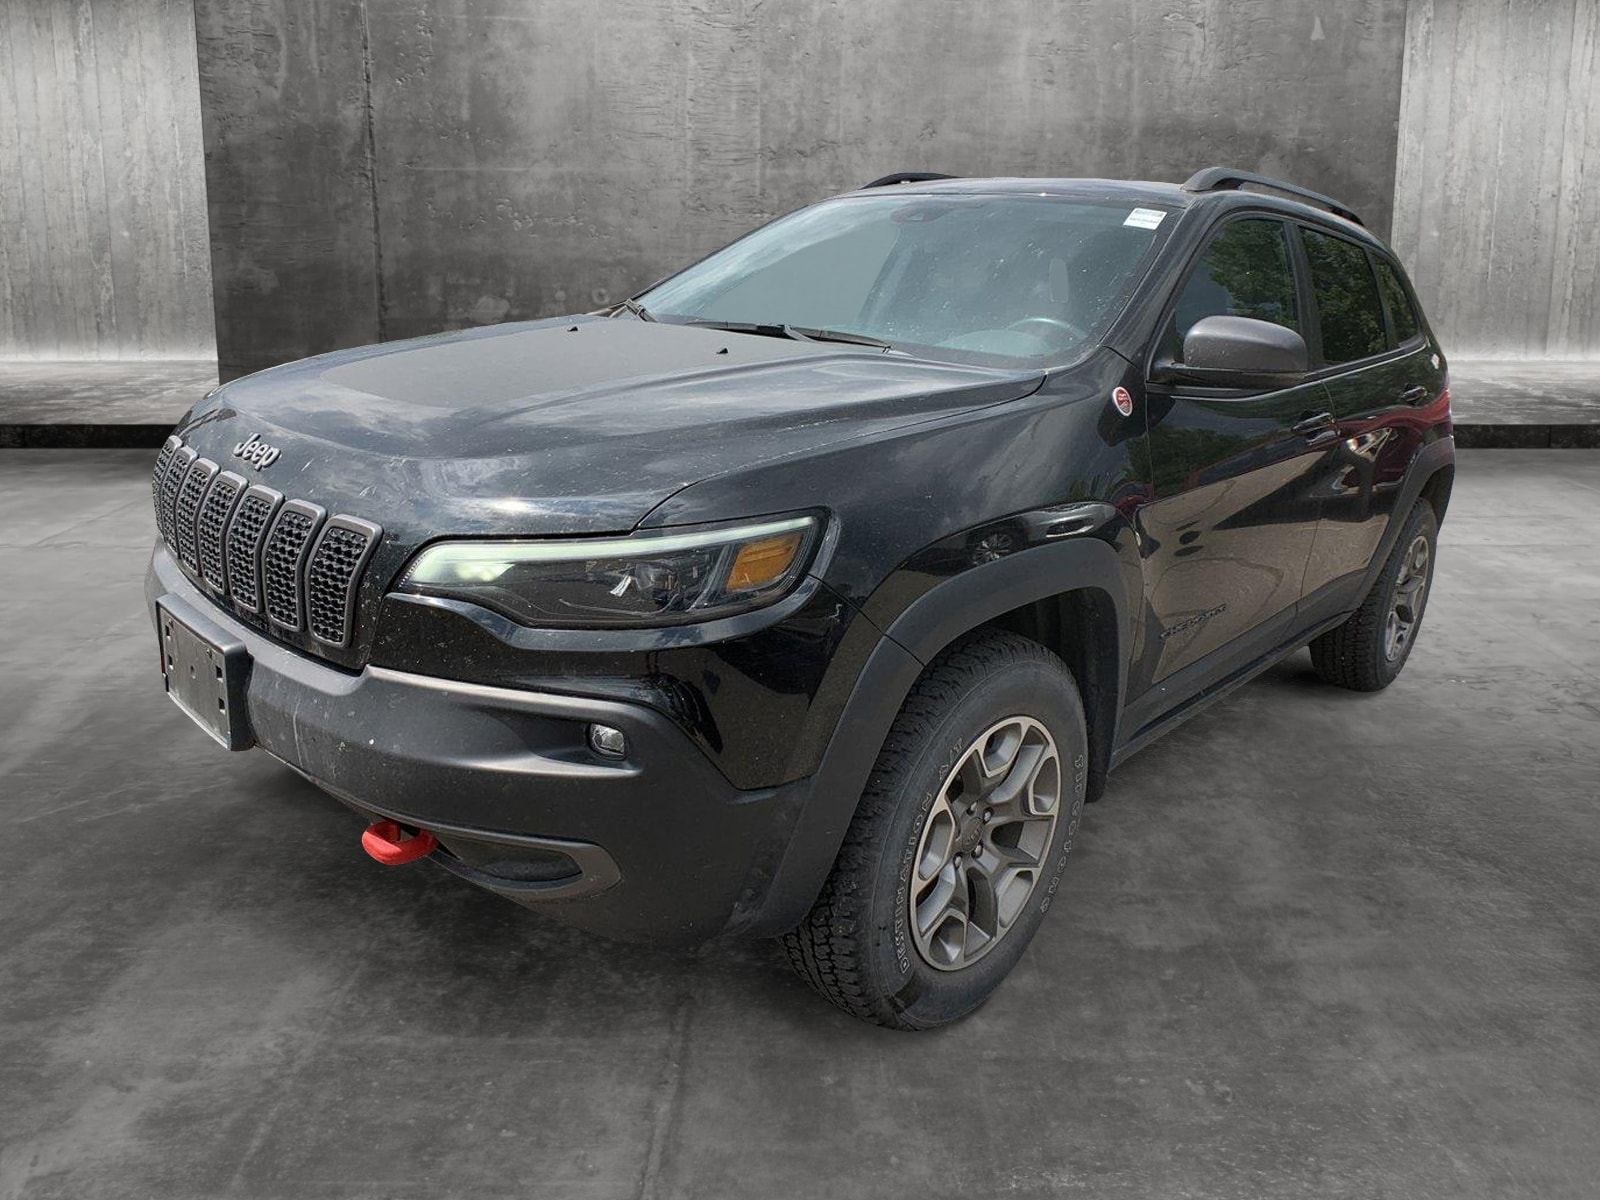 Used 2021 Jeep Cherokee Trailhawk with VIN 1C4PJMBX1MD128890 for sale in Littleton, CO